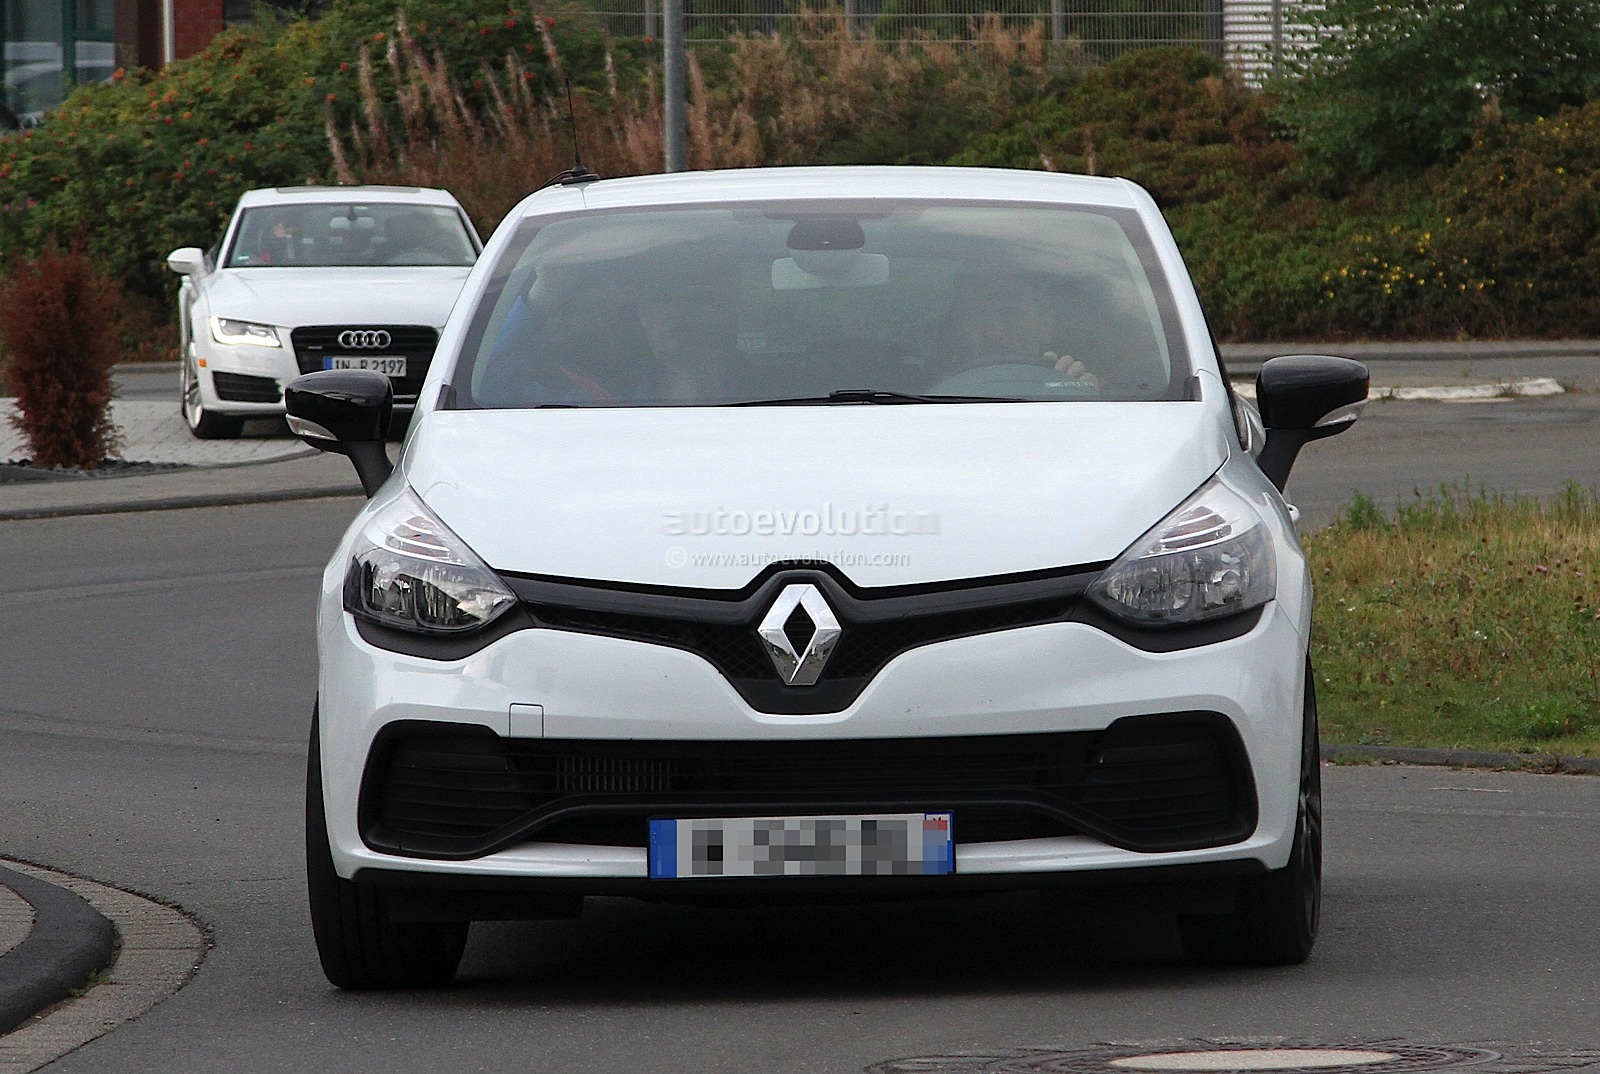 http://s1.cdn.autoevolution.com/images/news/gallery/2013-renault-clio-iv-rs-210-spotted-undisguised-in-white_1.jpg